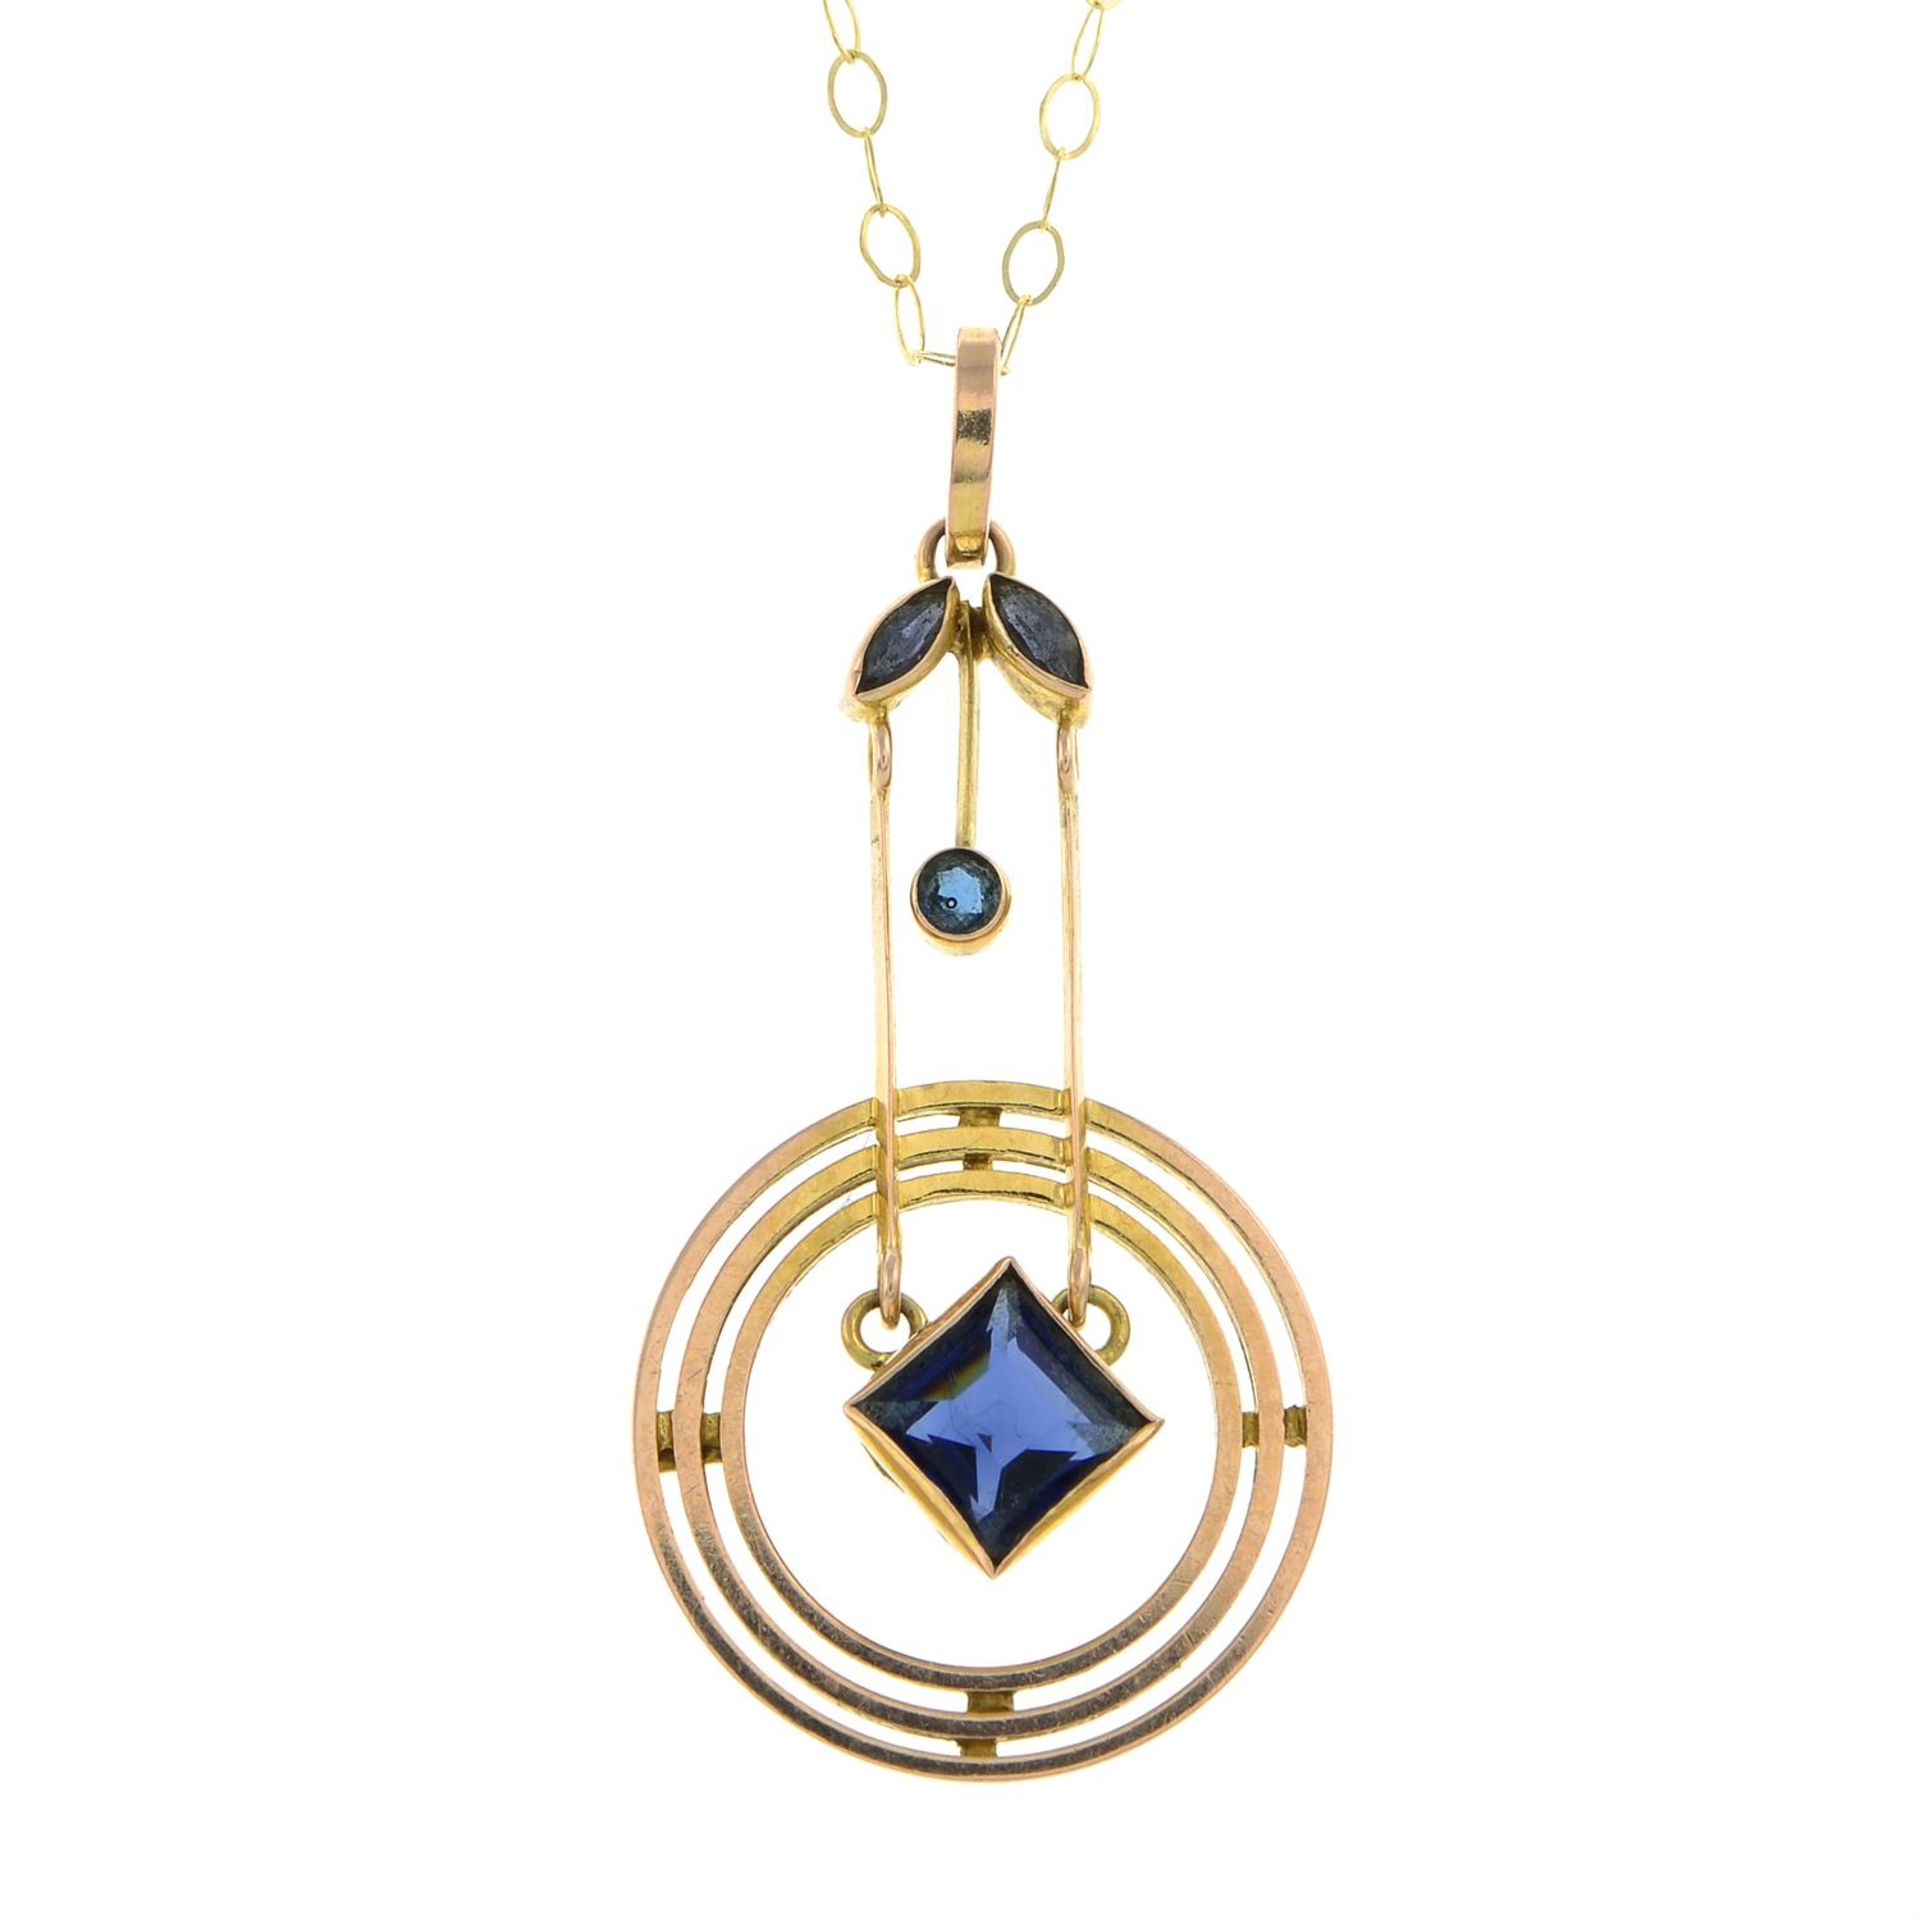 Early 20th century 9ct gold blue paste pendant, with later chain.